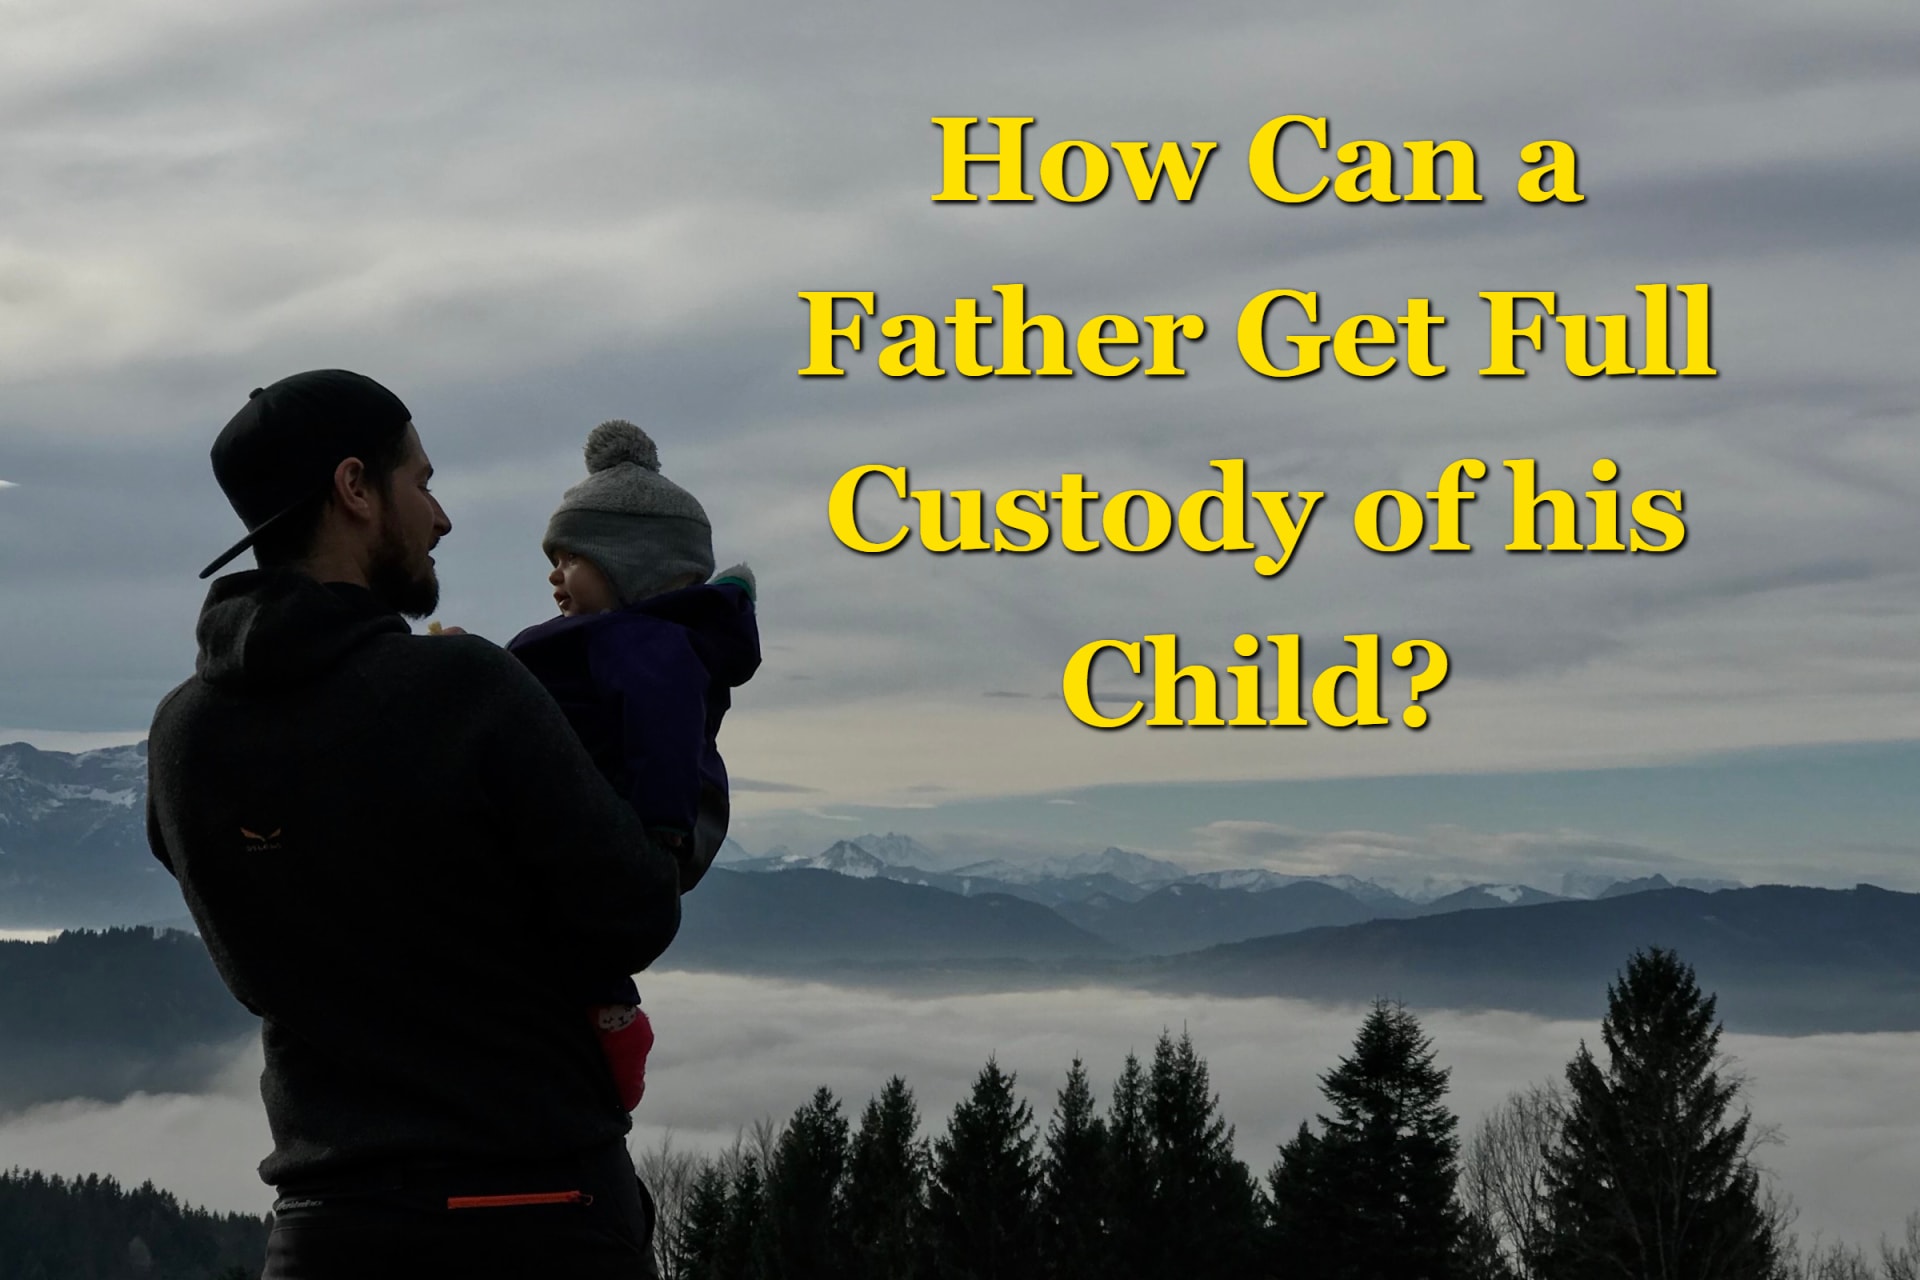 A Father with Custody of his Child - Ilarraza Law, P.C. - If you're a father seeking custody of your child, everything is on your side. Ilarraza Law advocates for fathers' rights in child custody cases.